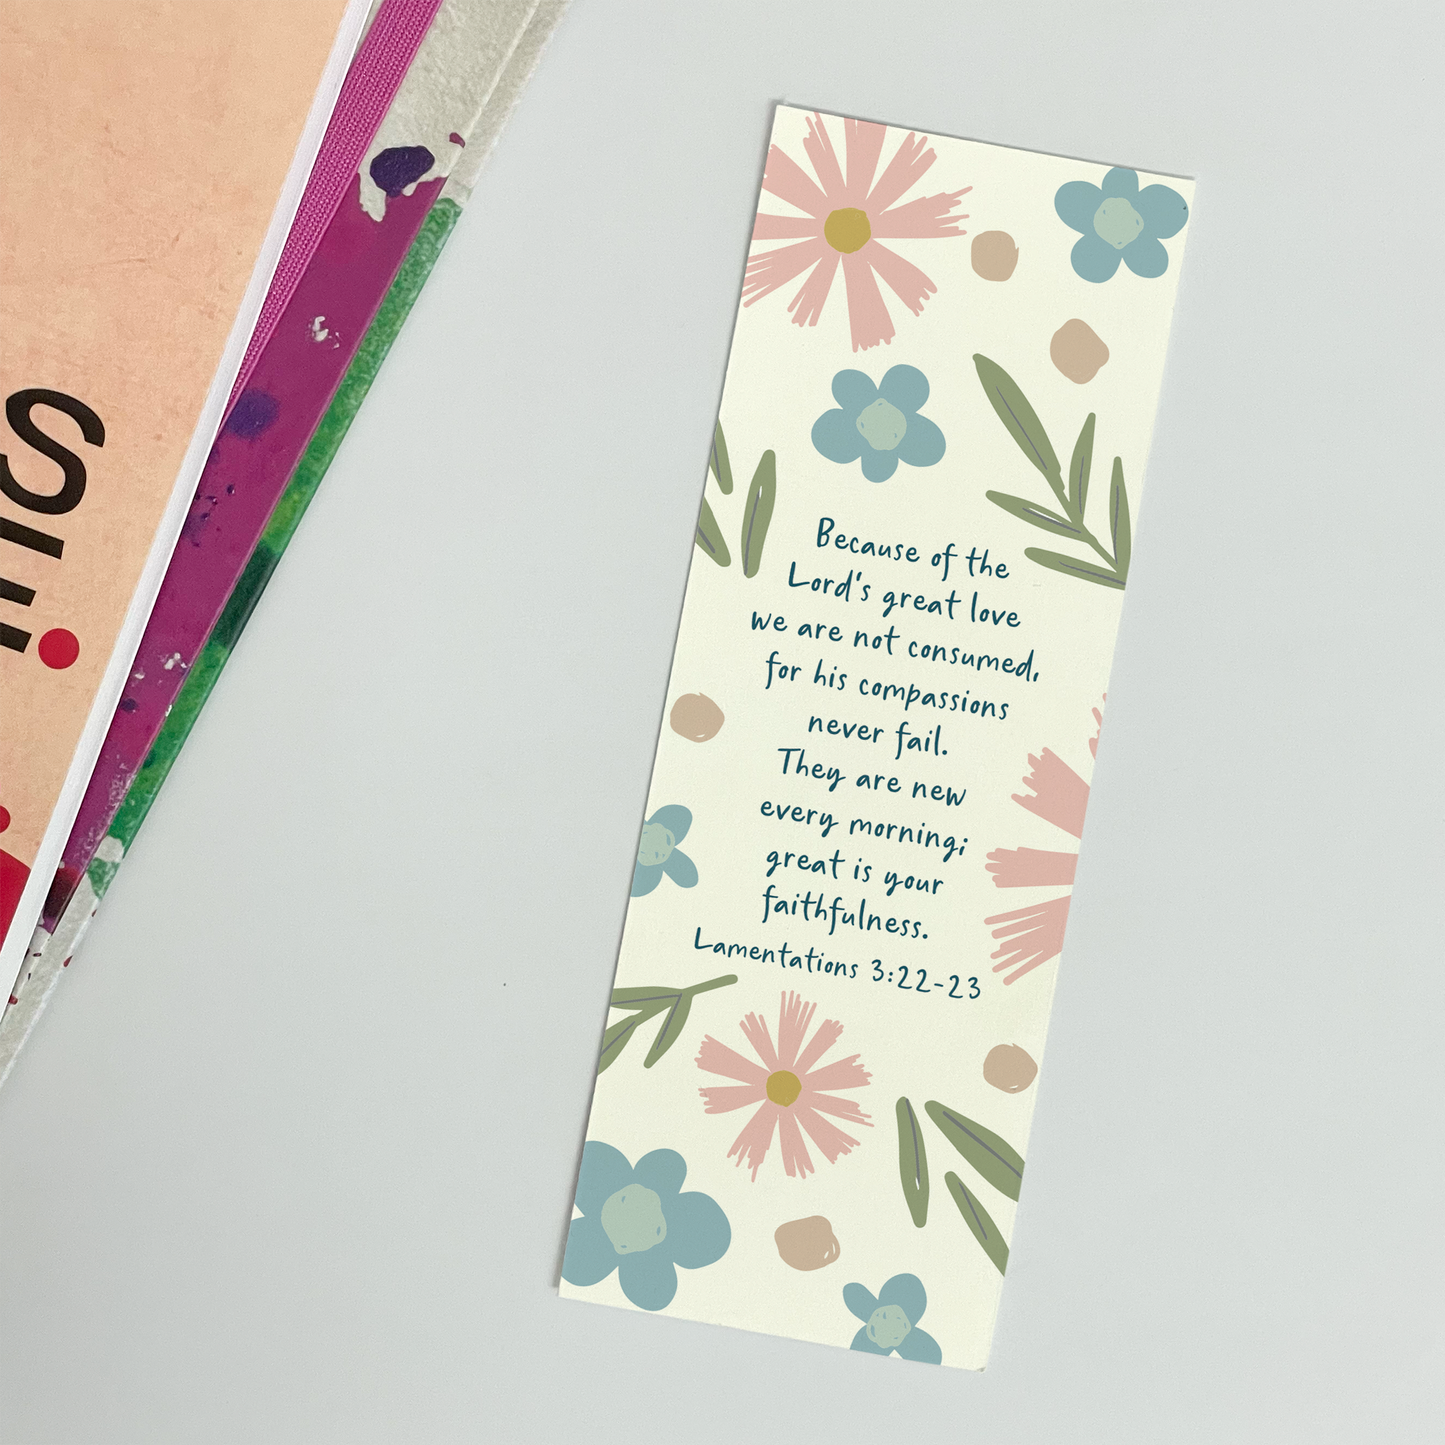 CHRISTIAN BOOKMARK GIFT - GREAT IS YOUR FAITHFULNESS LAMENTATIONS 3:22-23 - THE WEE SPARROW